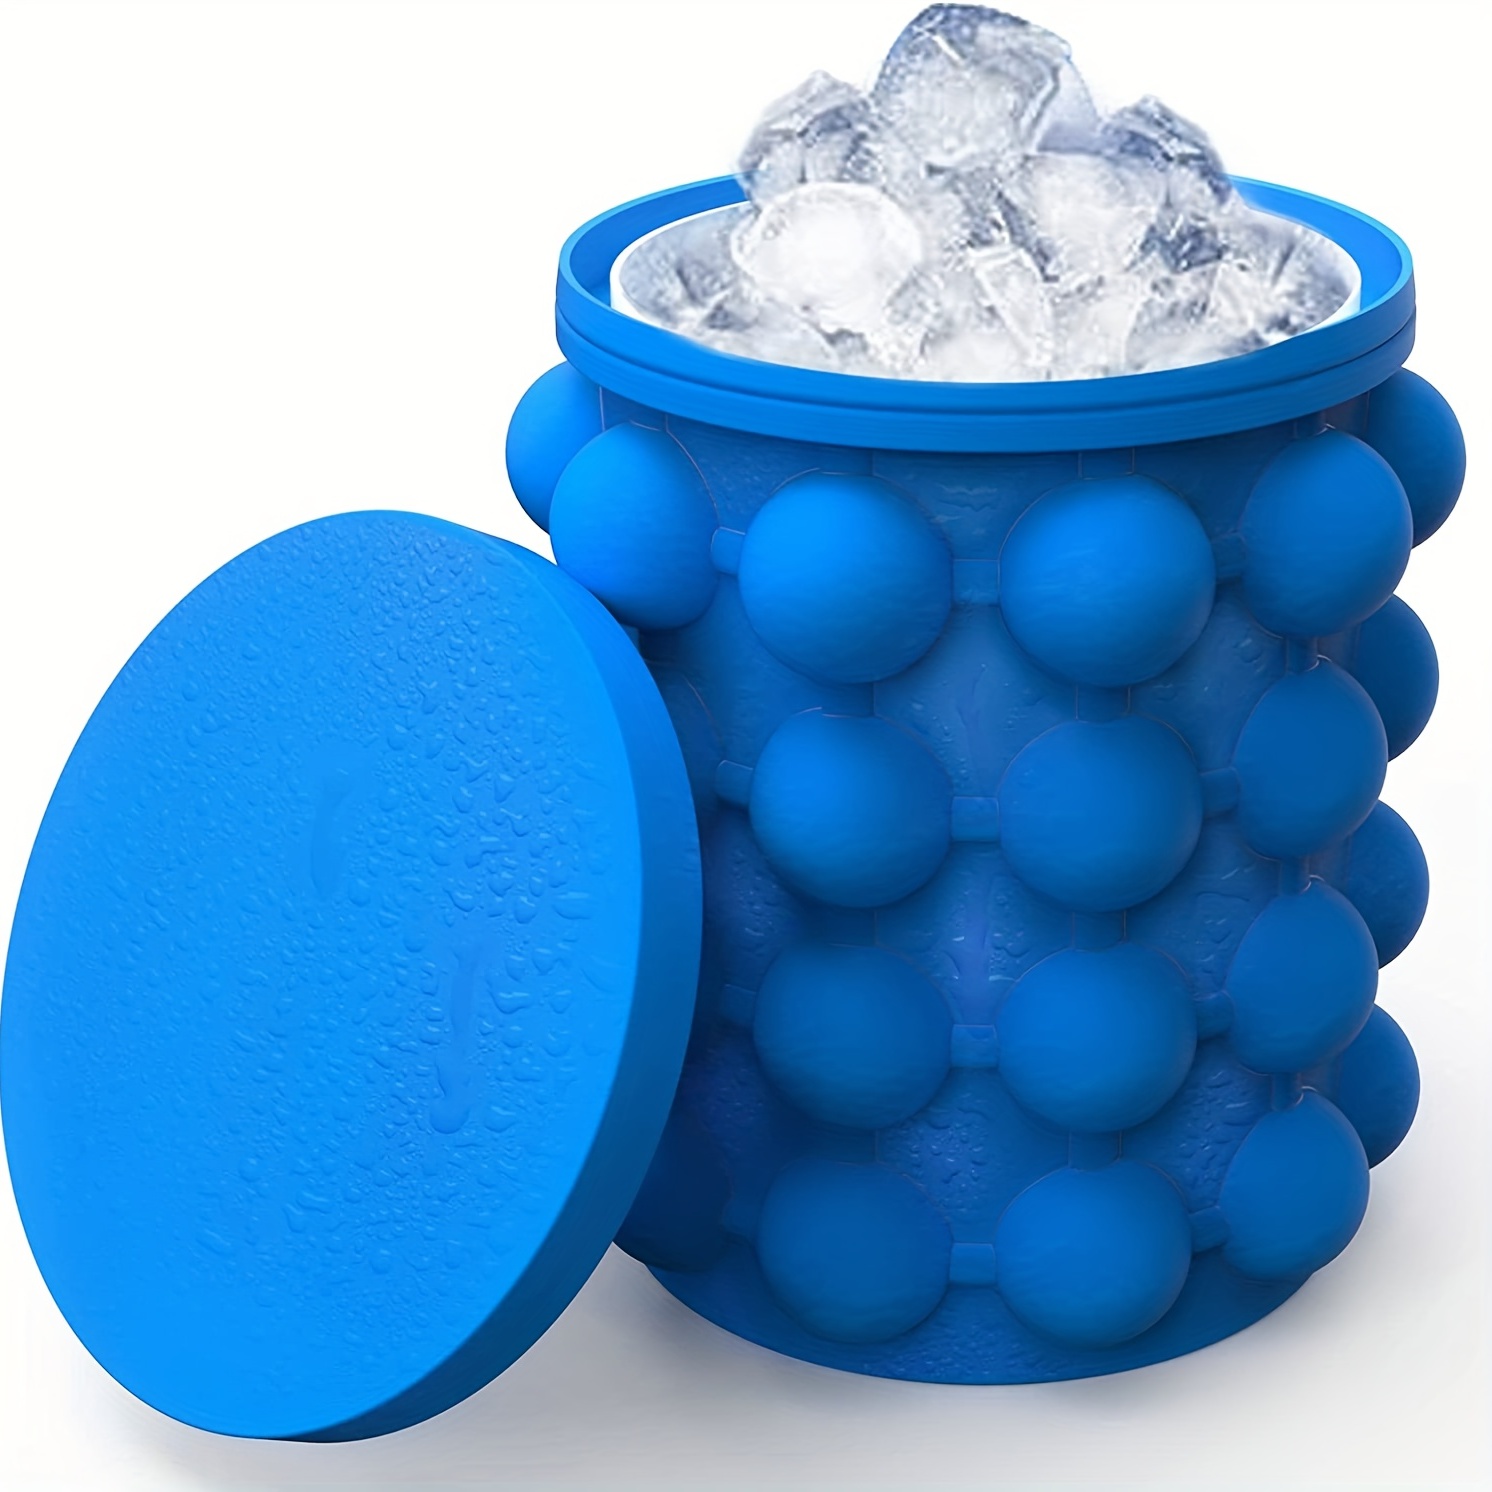 Large Ice Cube Maker For Home Use